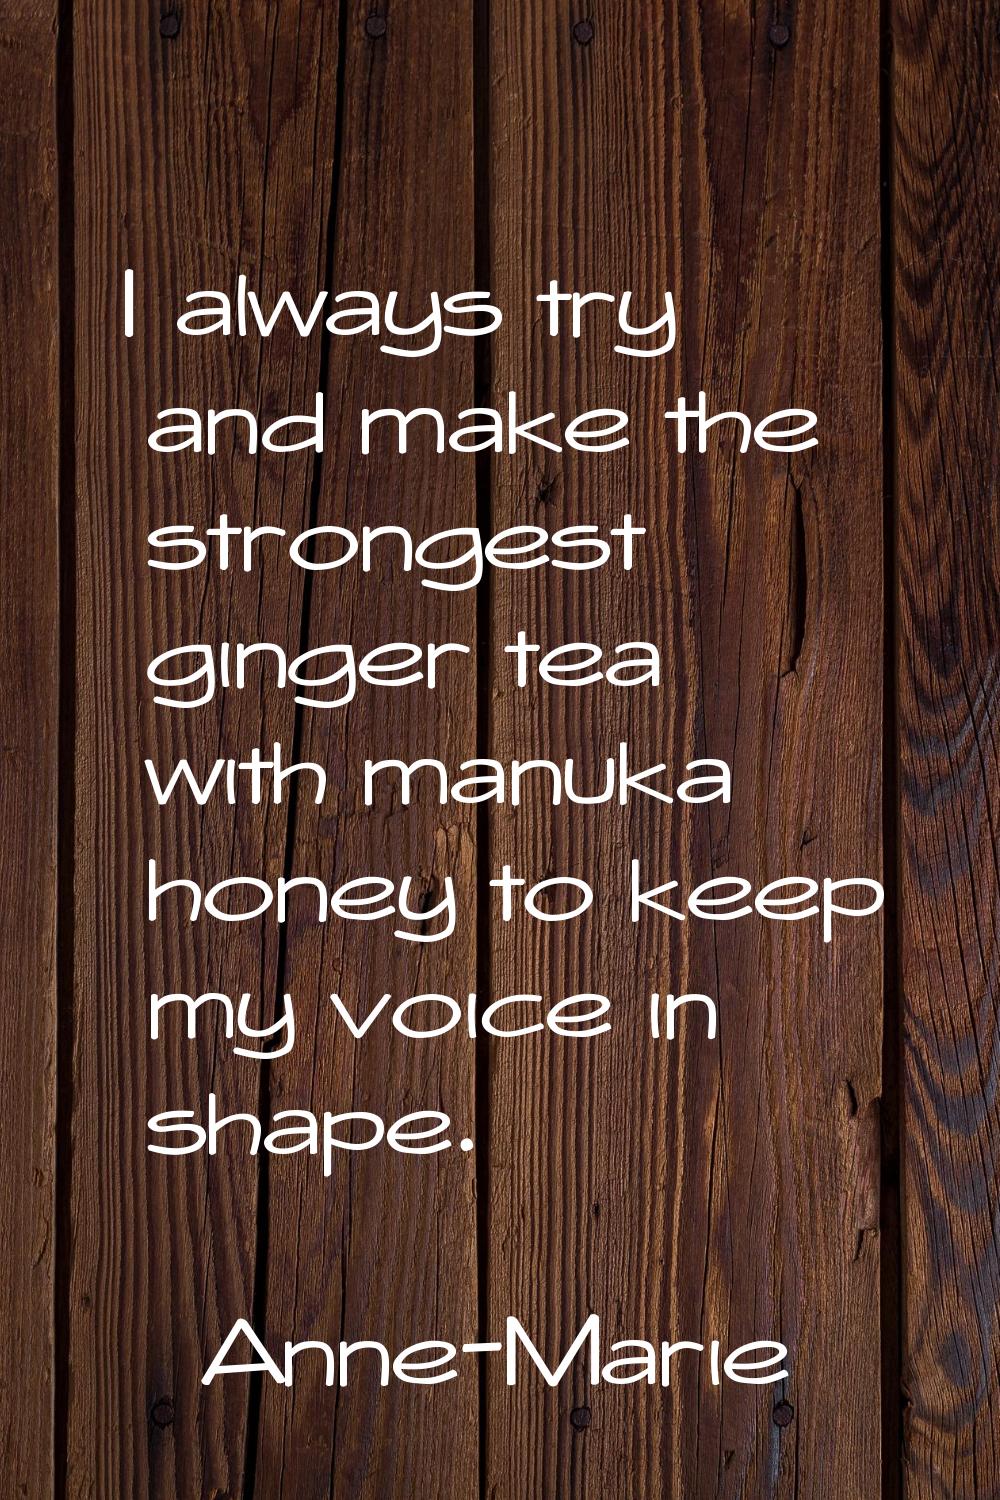 I always try and make the strongest ginger tea with manuka honey to keep my voice in shape.